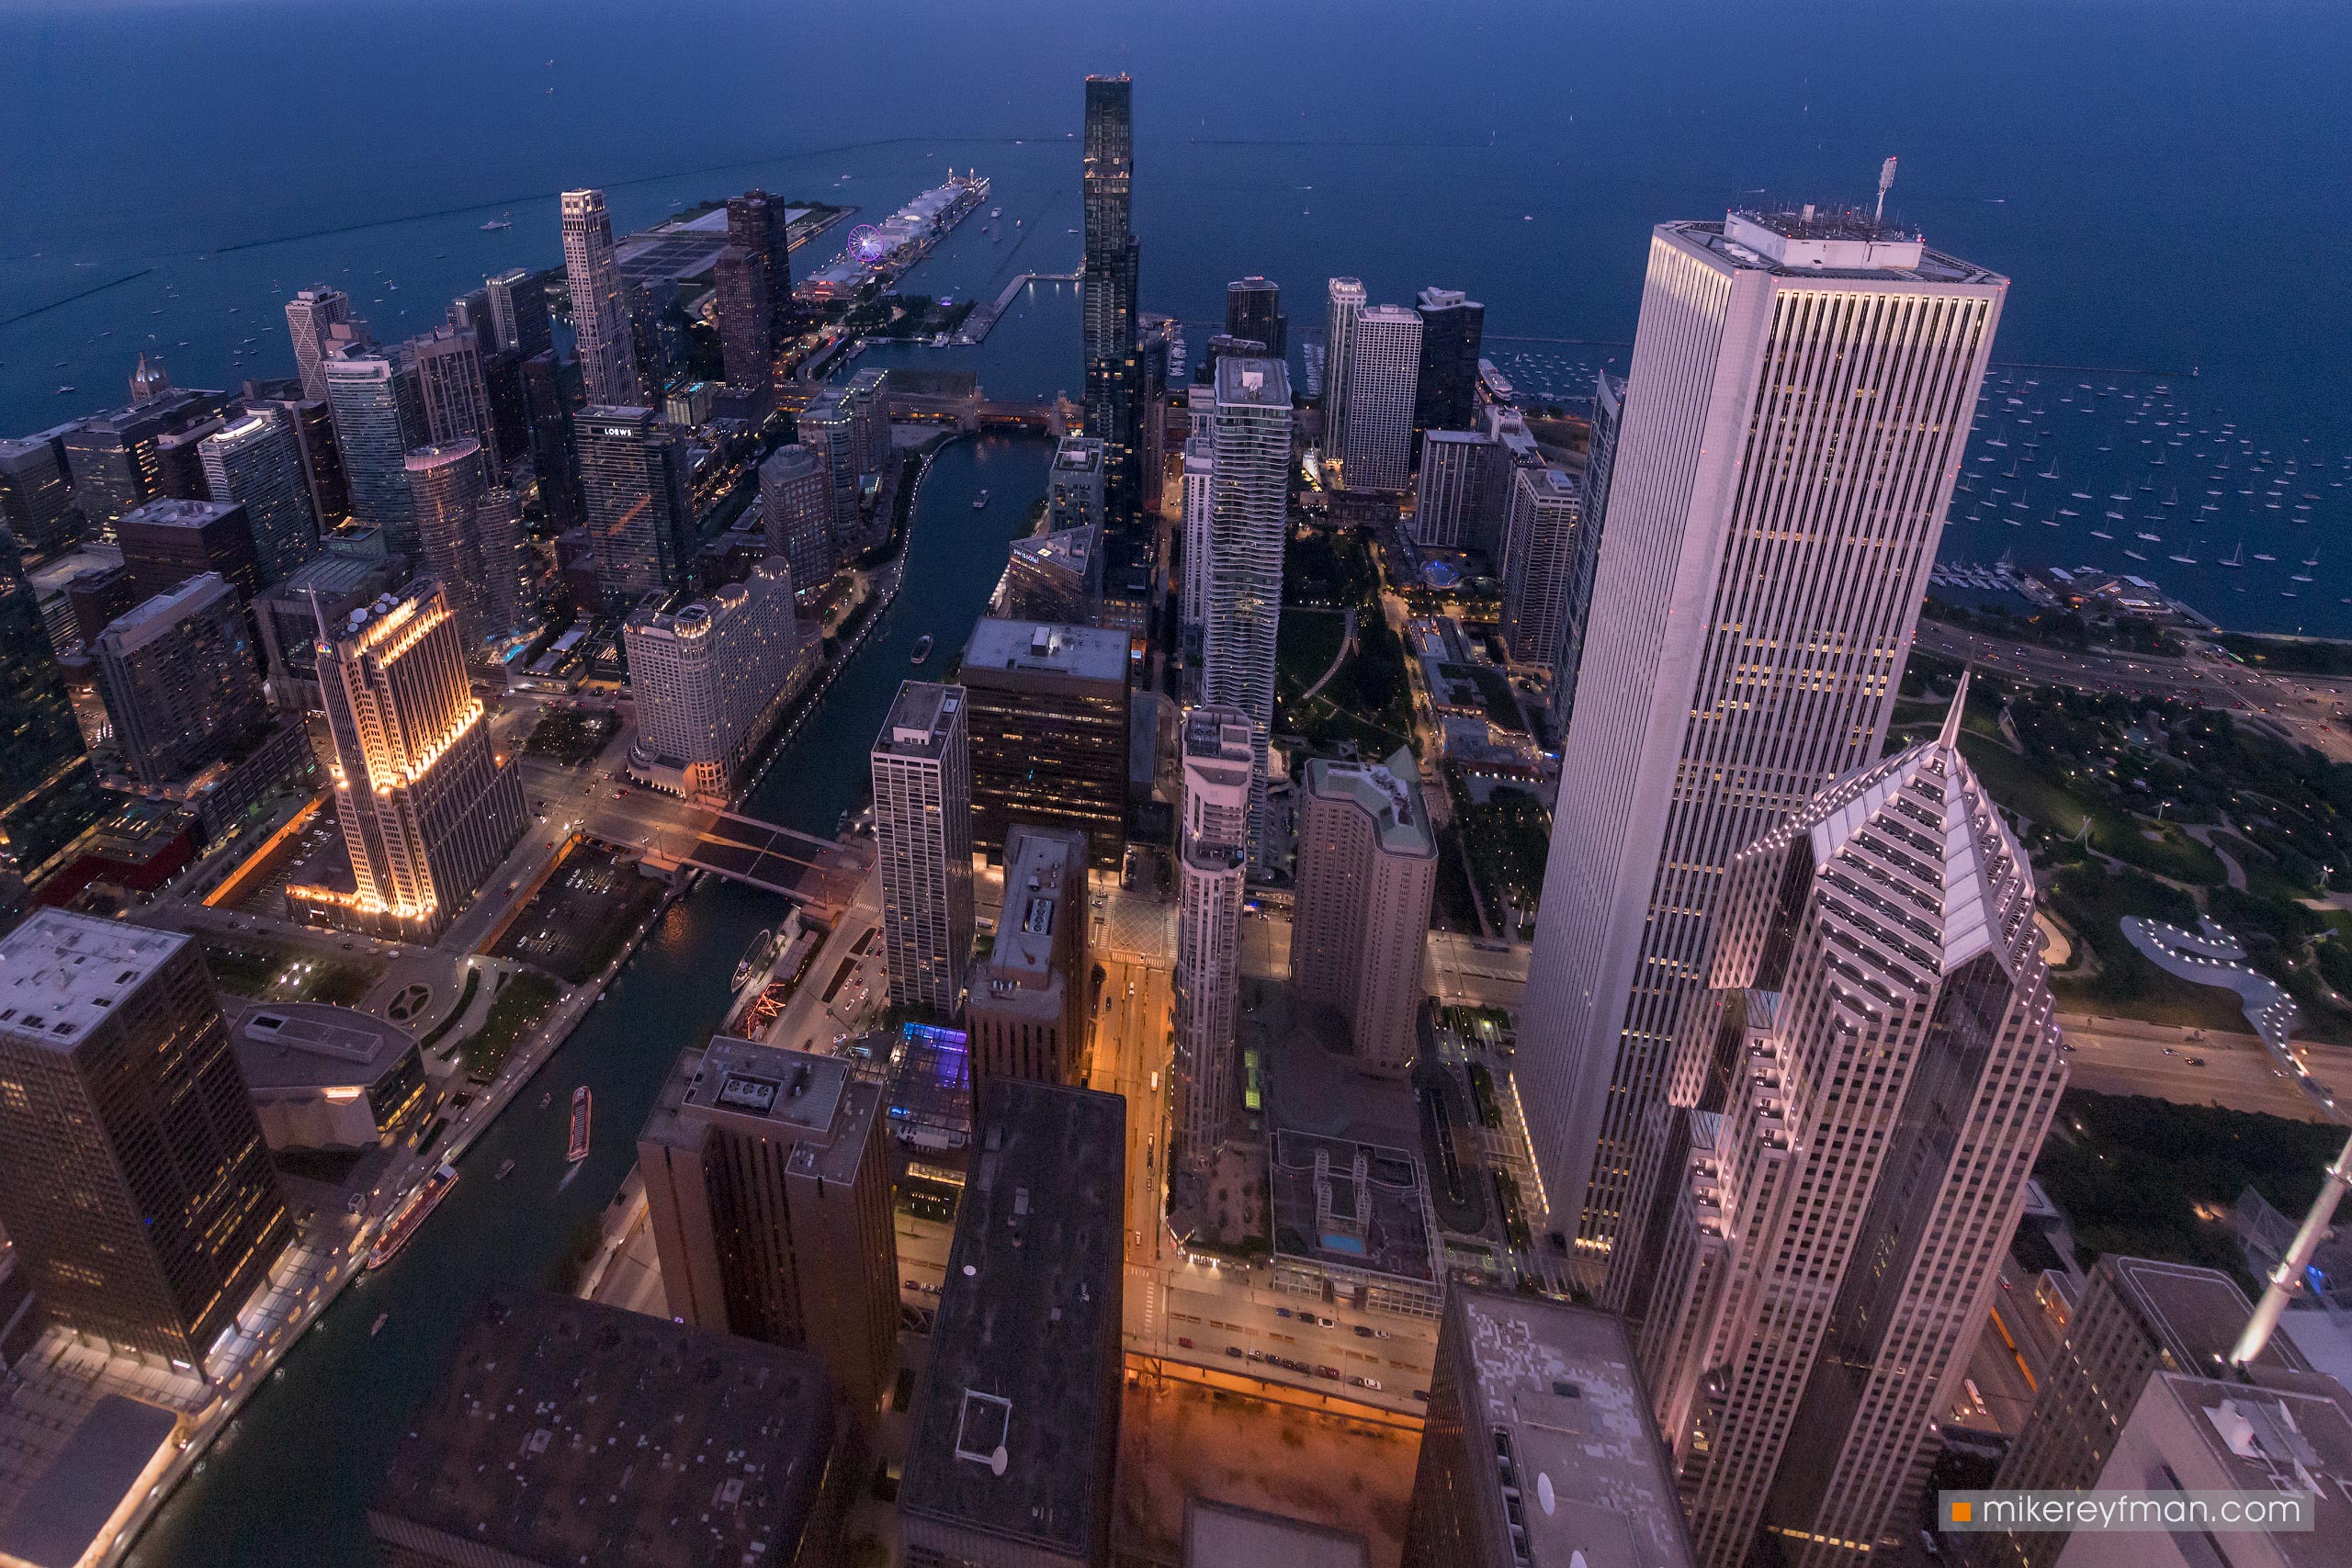 City from above - Chicago, Illinois, USA. Aerial view in the evening. 007-CH-2_50F2040 - Ever-beating architectural heart of America. The birthplace of the most iconic buildings in the country. - Mike Reyfman Photography